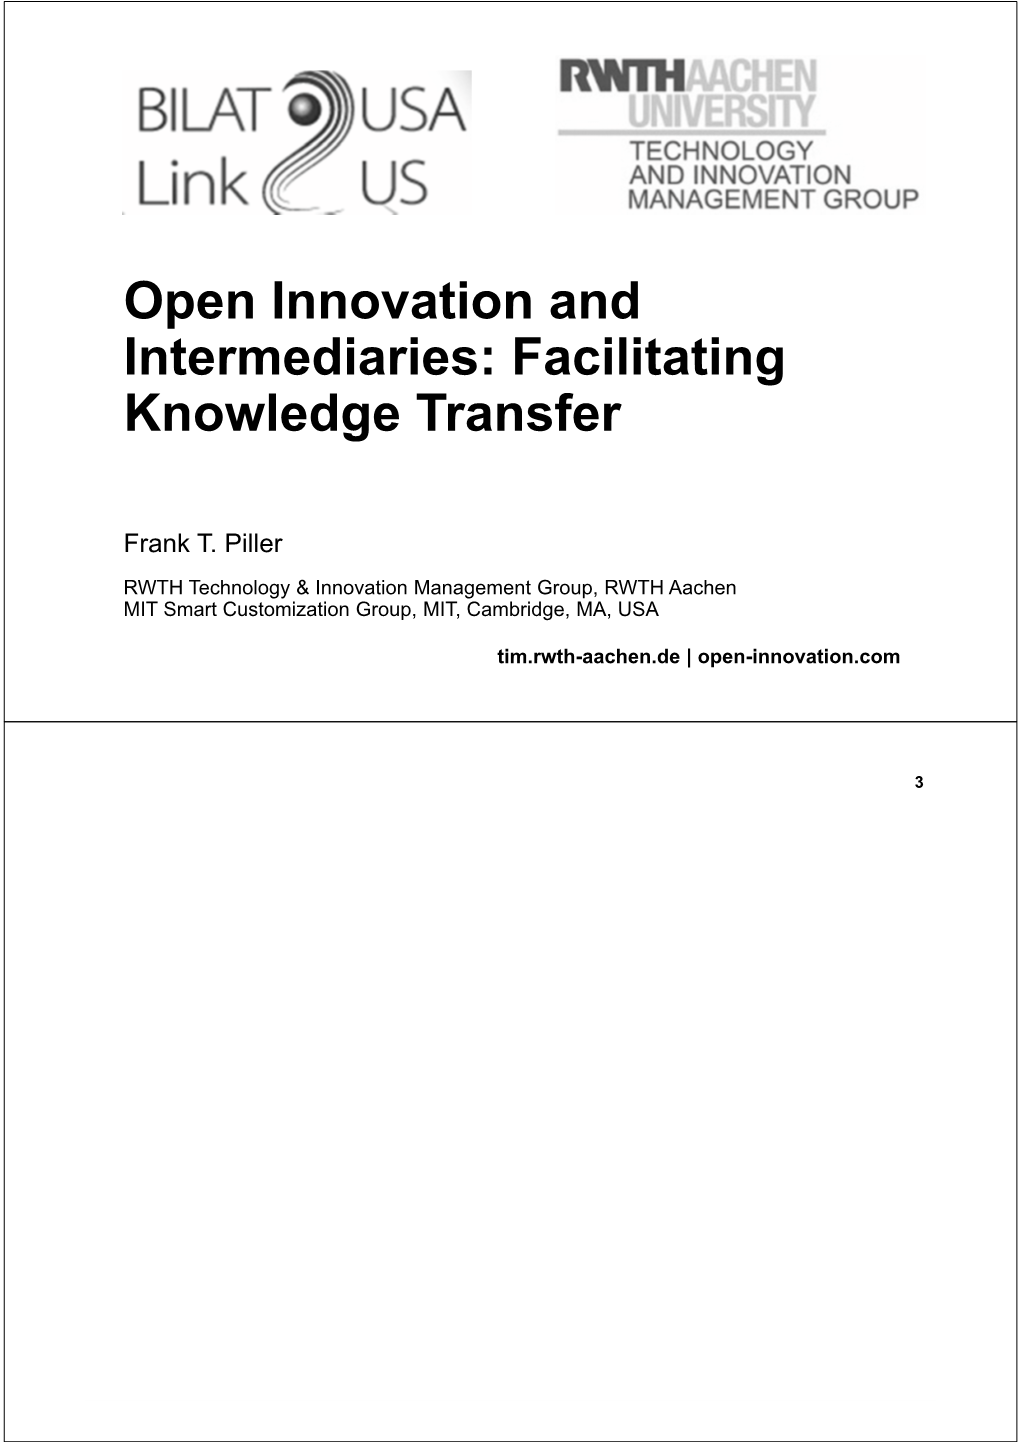 Open Innovation and Intermediaries: Facilitating Knowledge Transfer